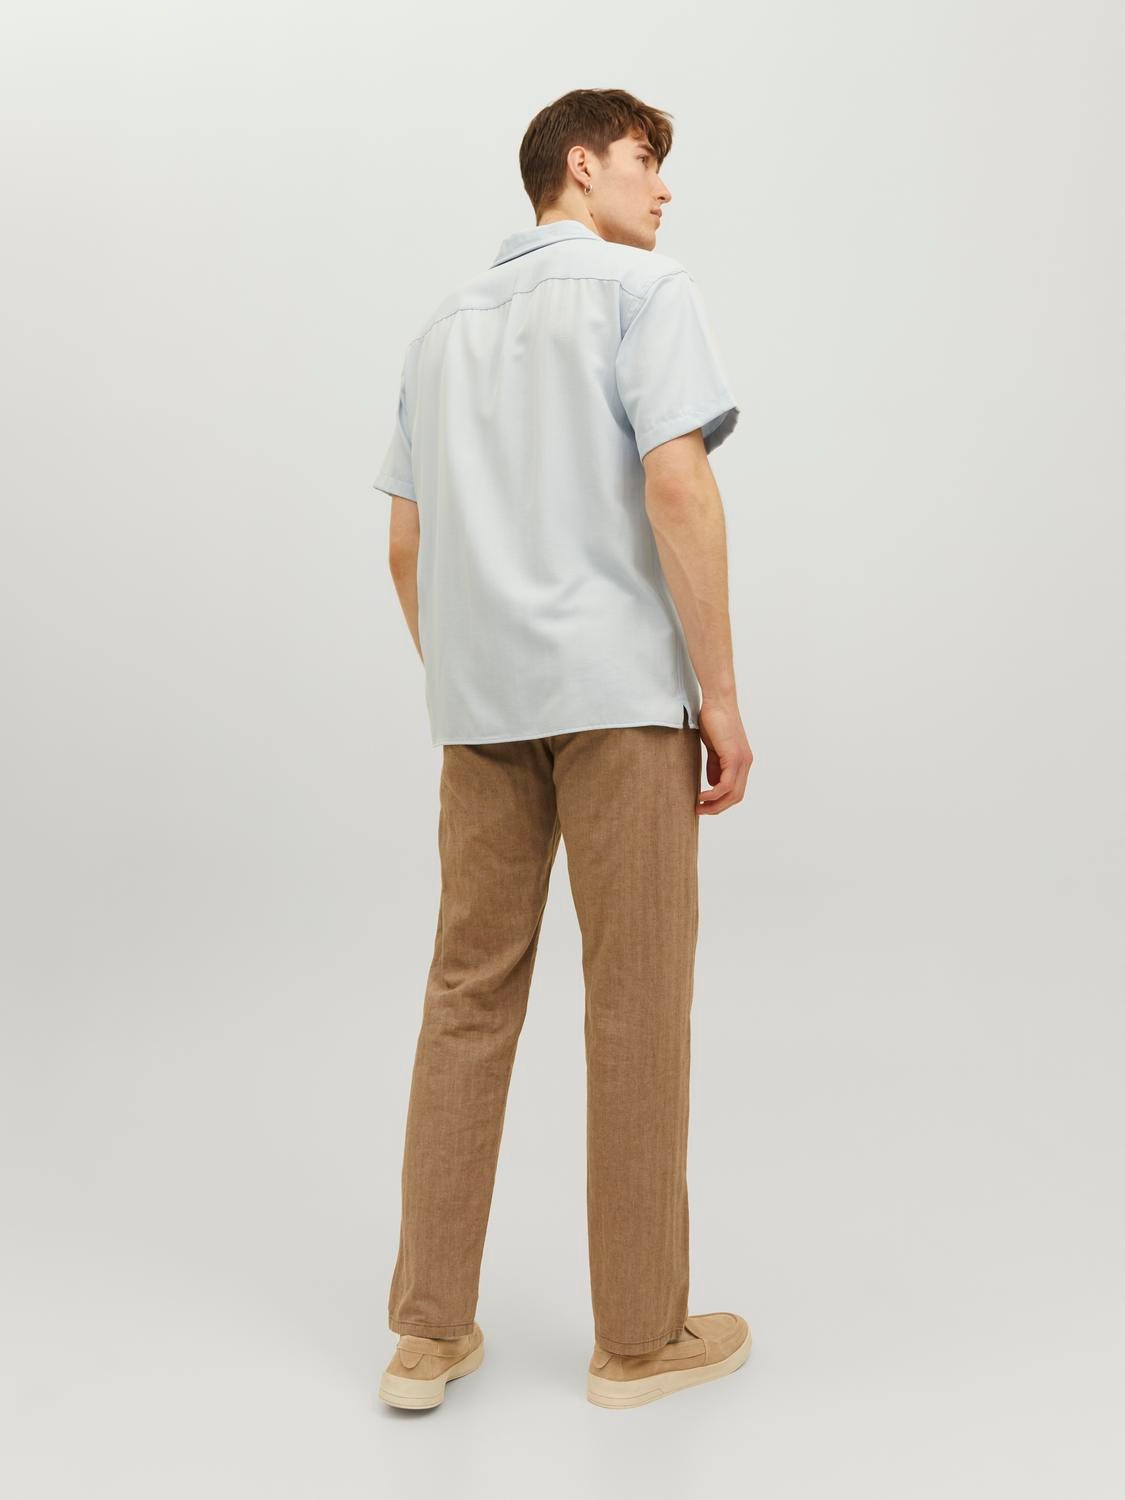 Jack & Jones Relaxed Fit Chino Hose -Falcon - 12234593